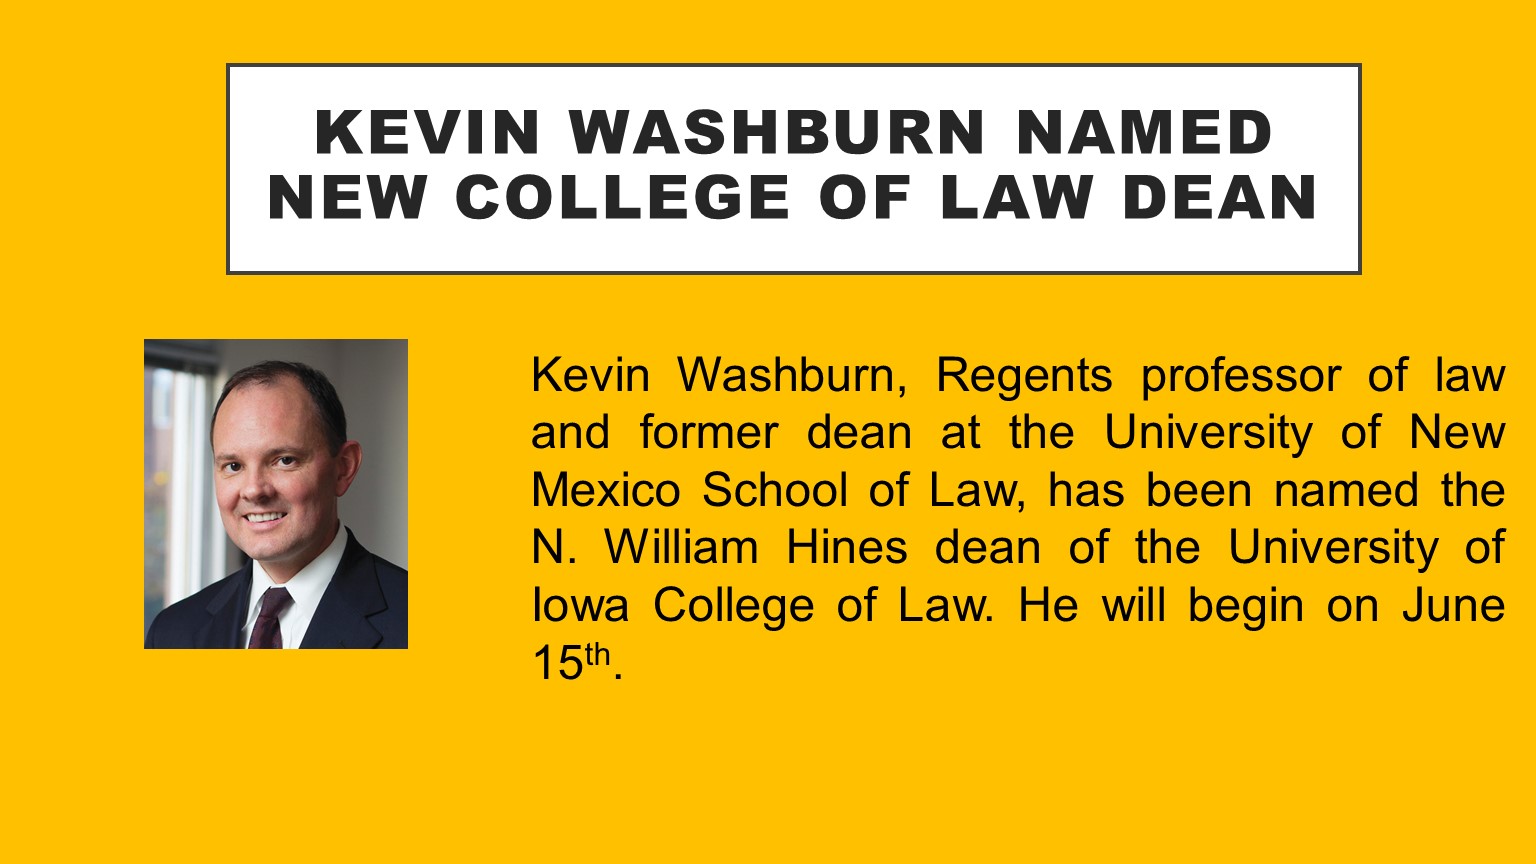 Kevin Washburn named new college of law dean. Kevin Washburn, Regents professor of law and former dean at the University of New Mexico School of Law, has been named the N. William Hines dean of the University of Iowa College of Law. He will begin on June 15th.